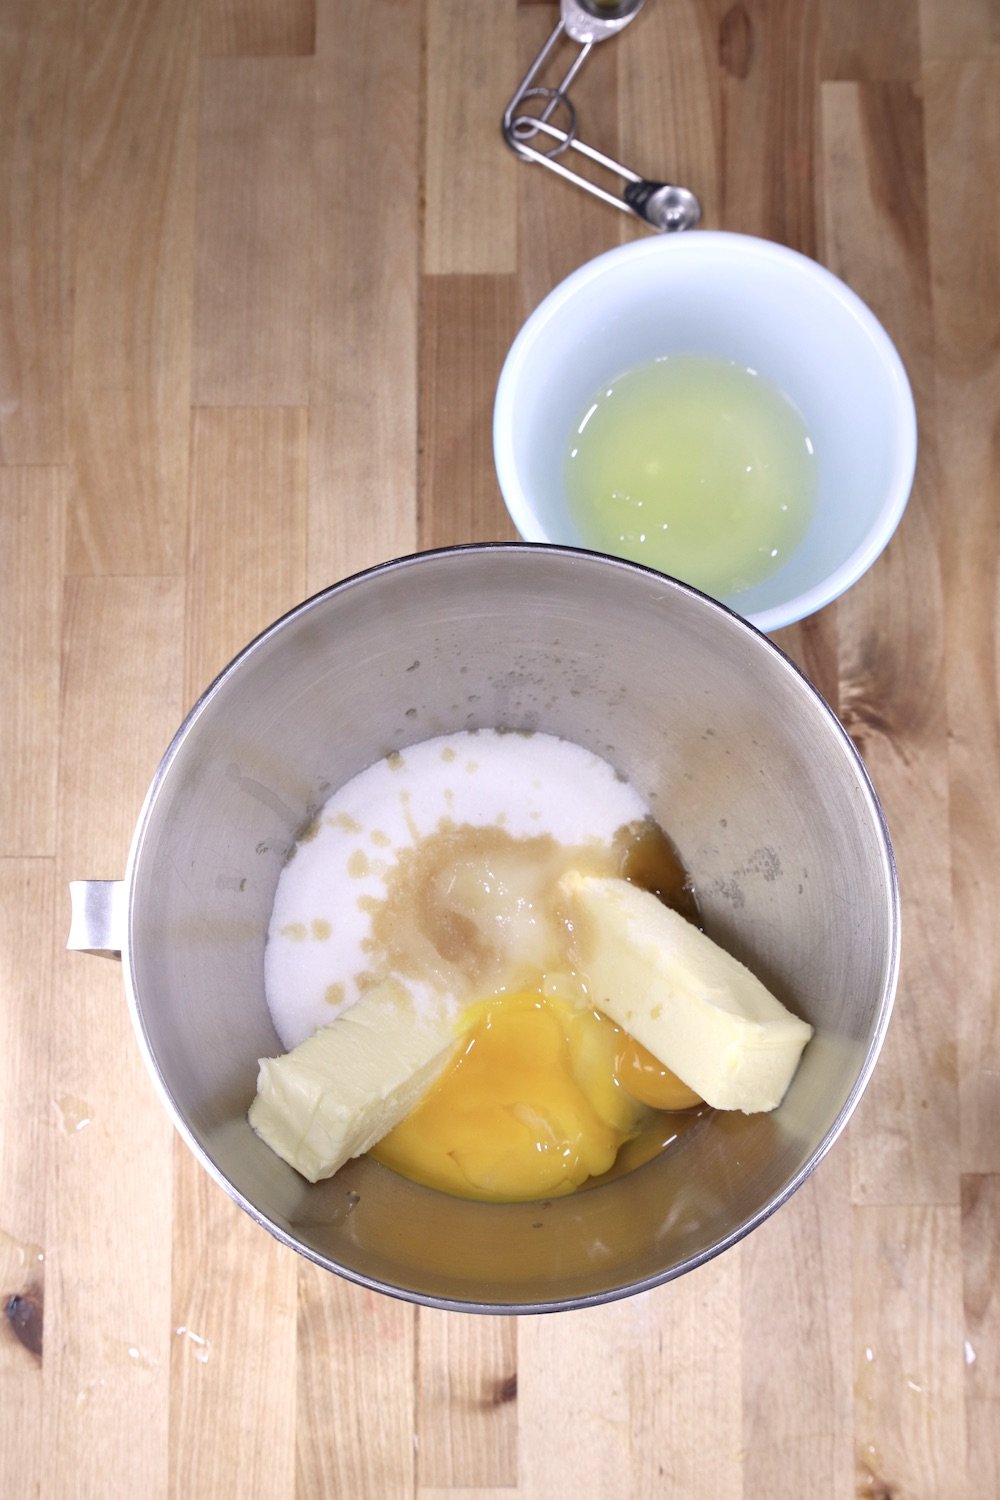 Mixer bowl with butter, sugar, vanilla & eggs, bowl of egg whites to the side